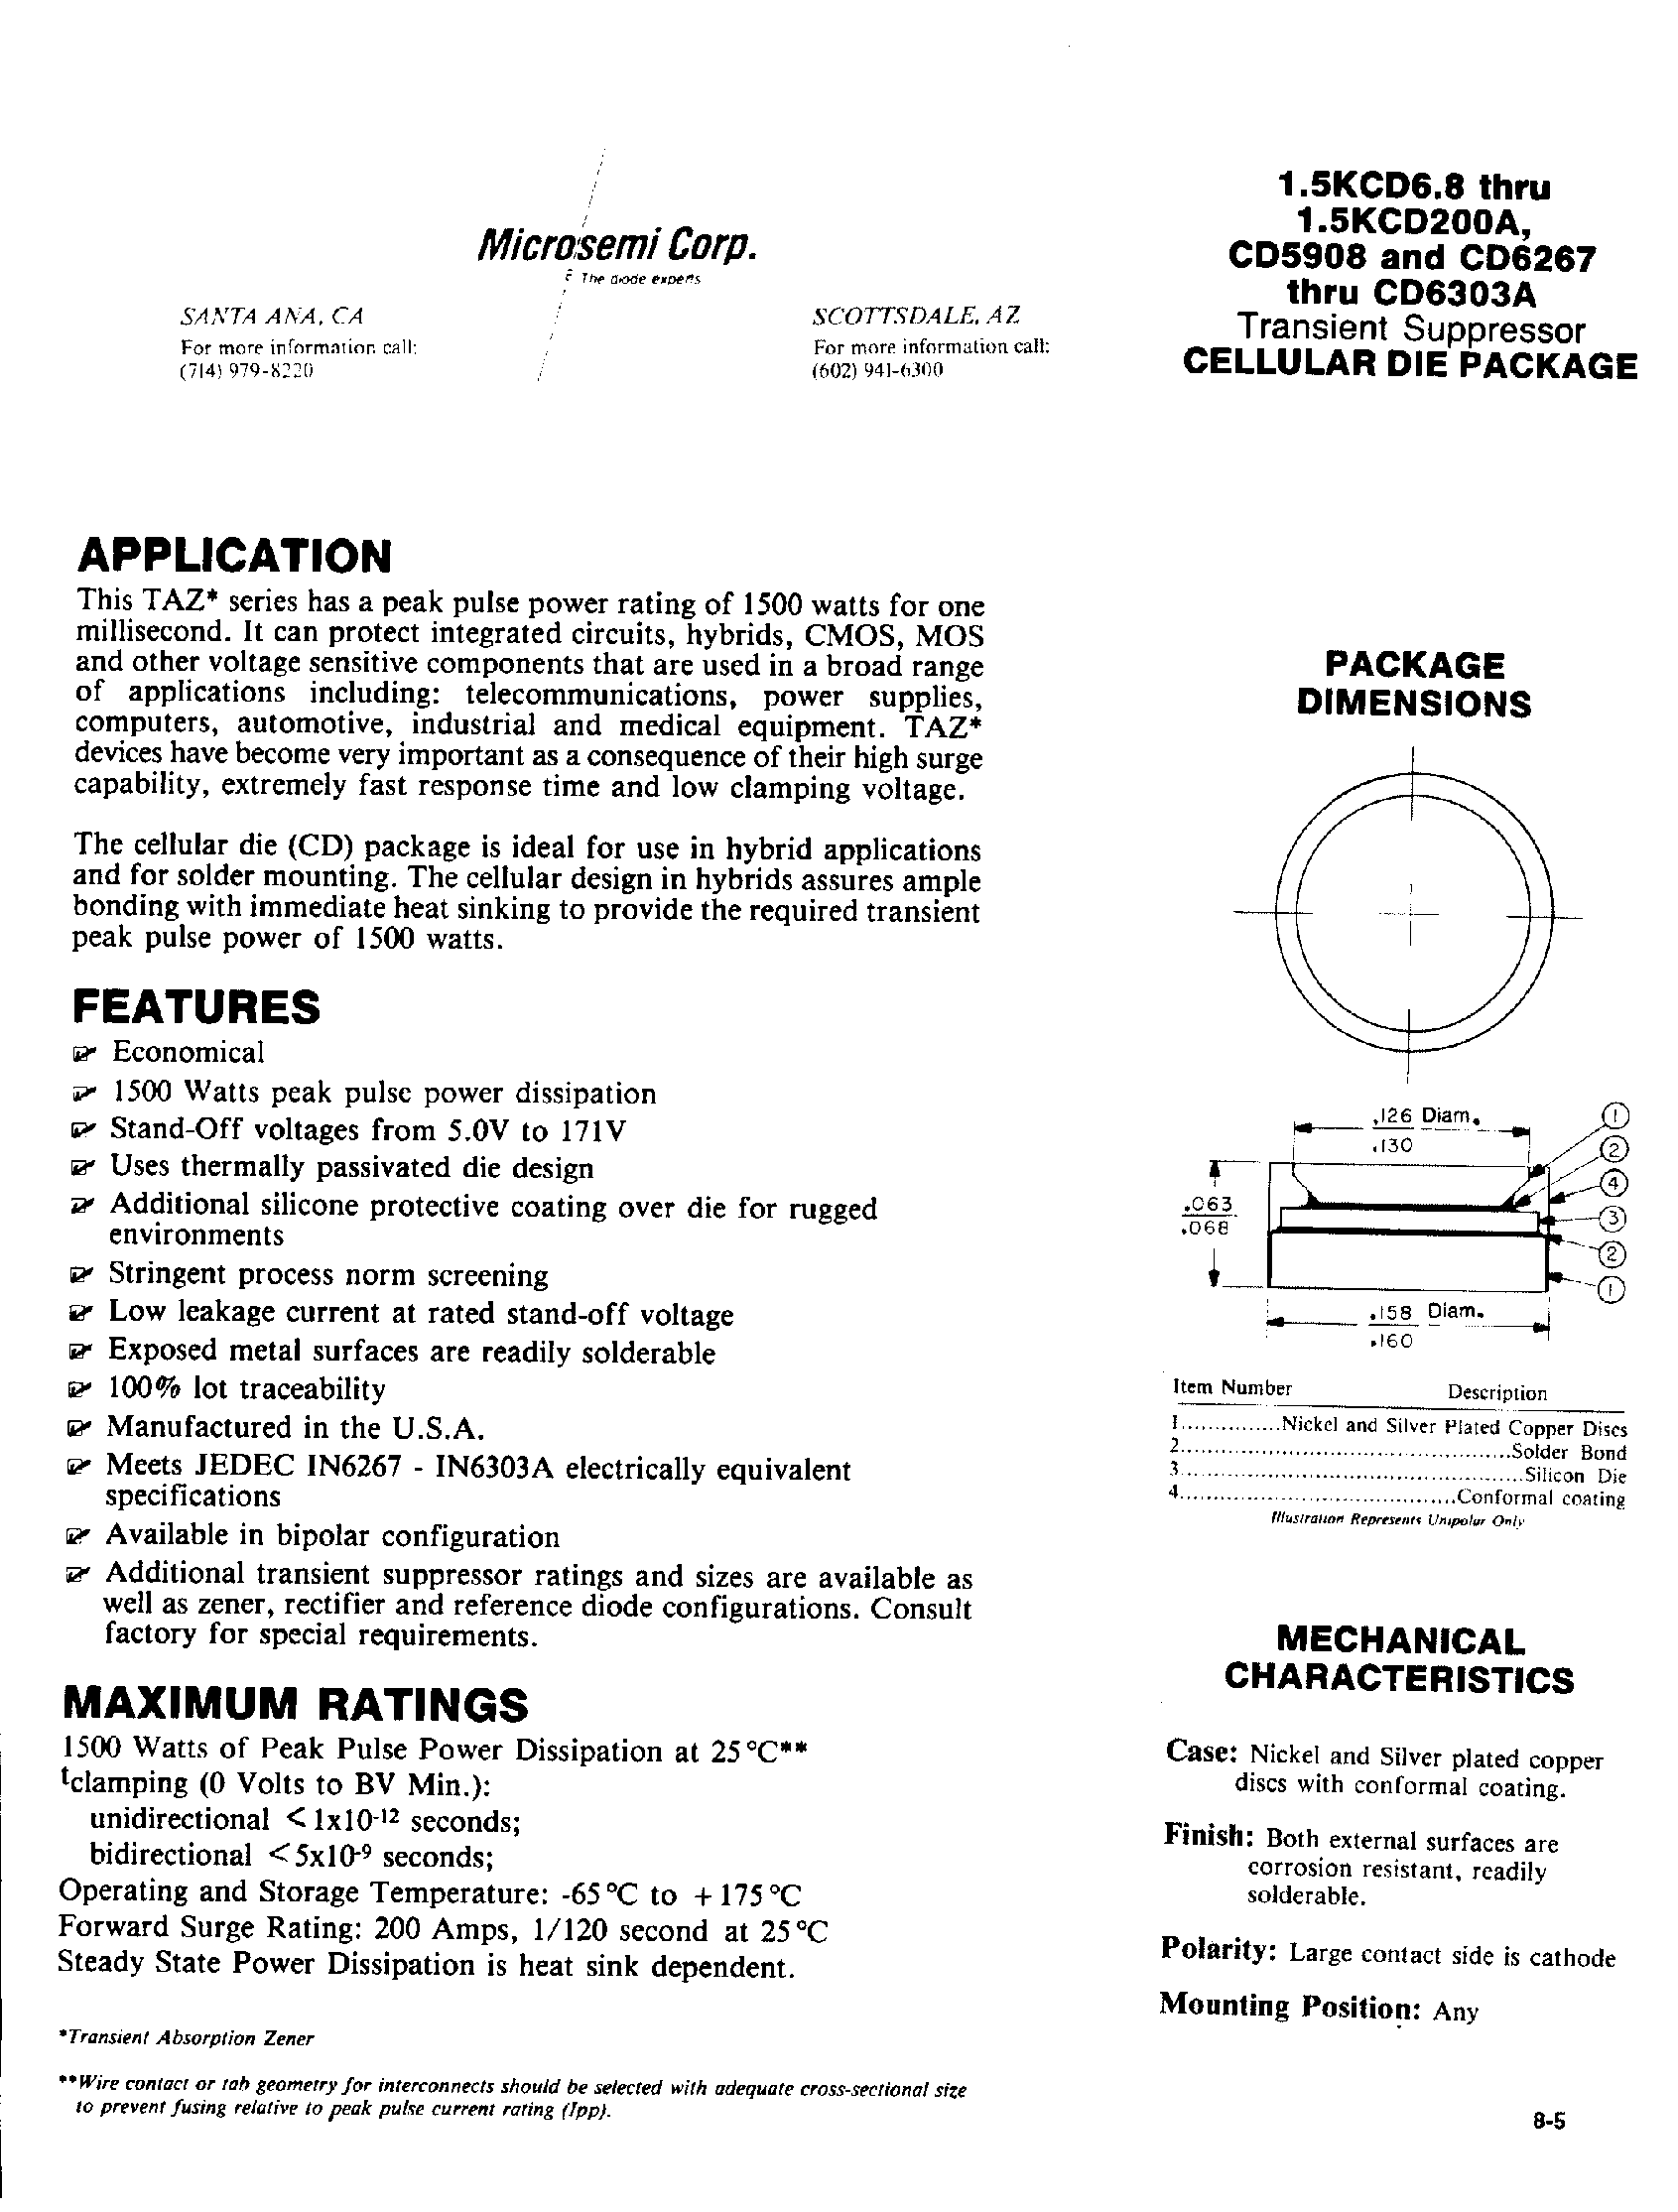 Datasheet CD6287A - Transient suppressor CELLULAR DIE PACKAGE page 1